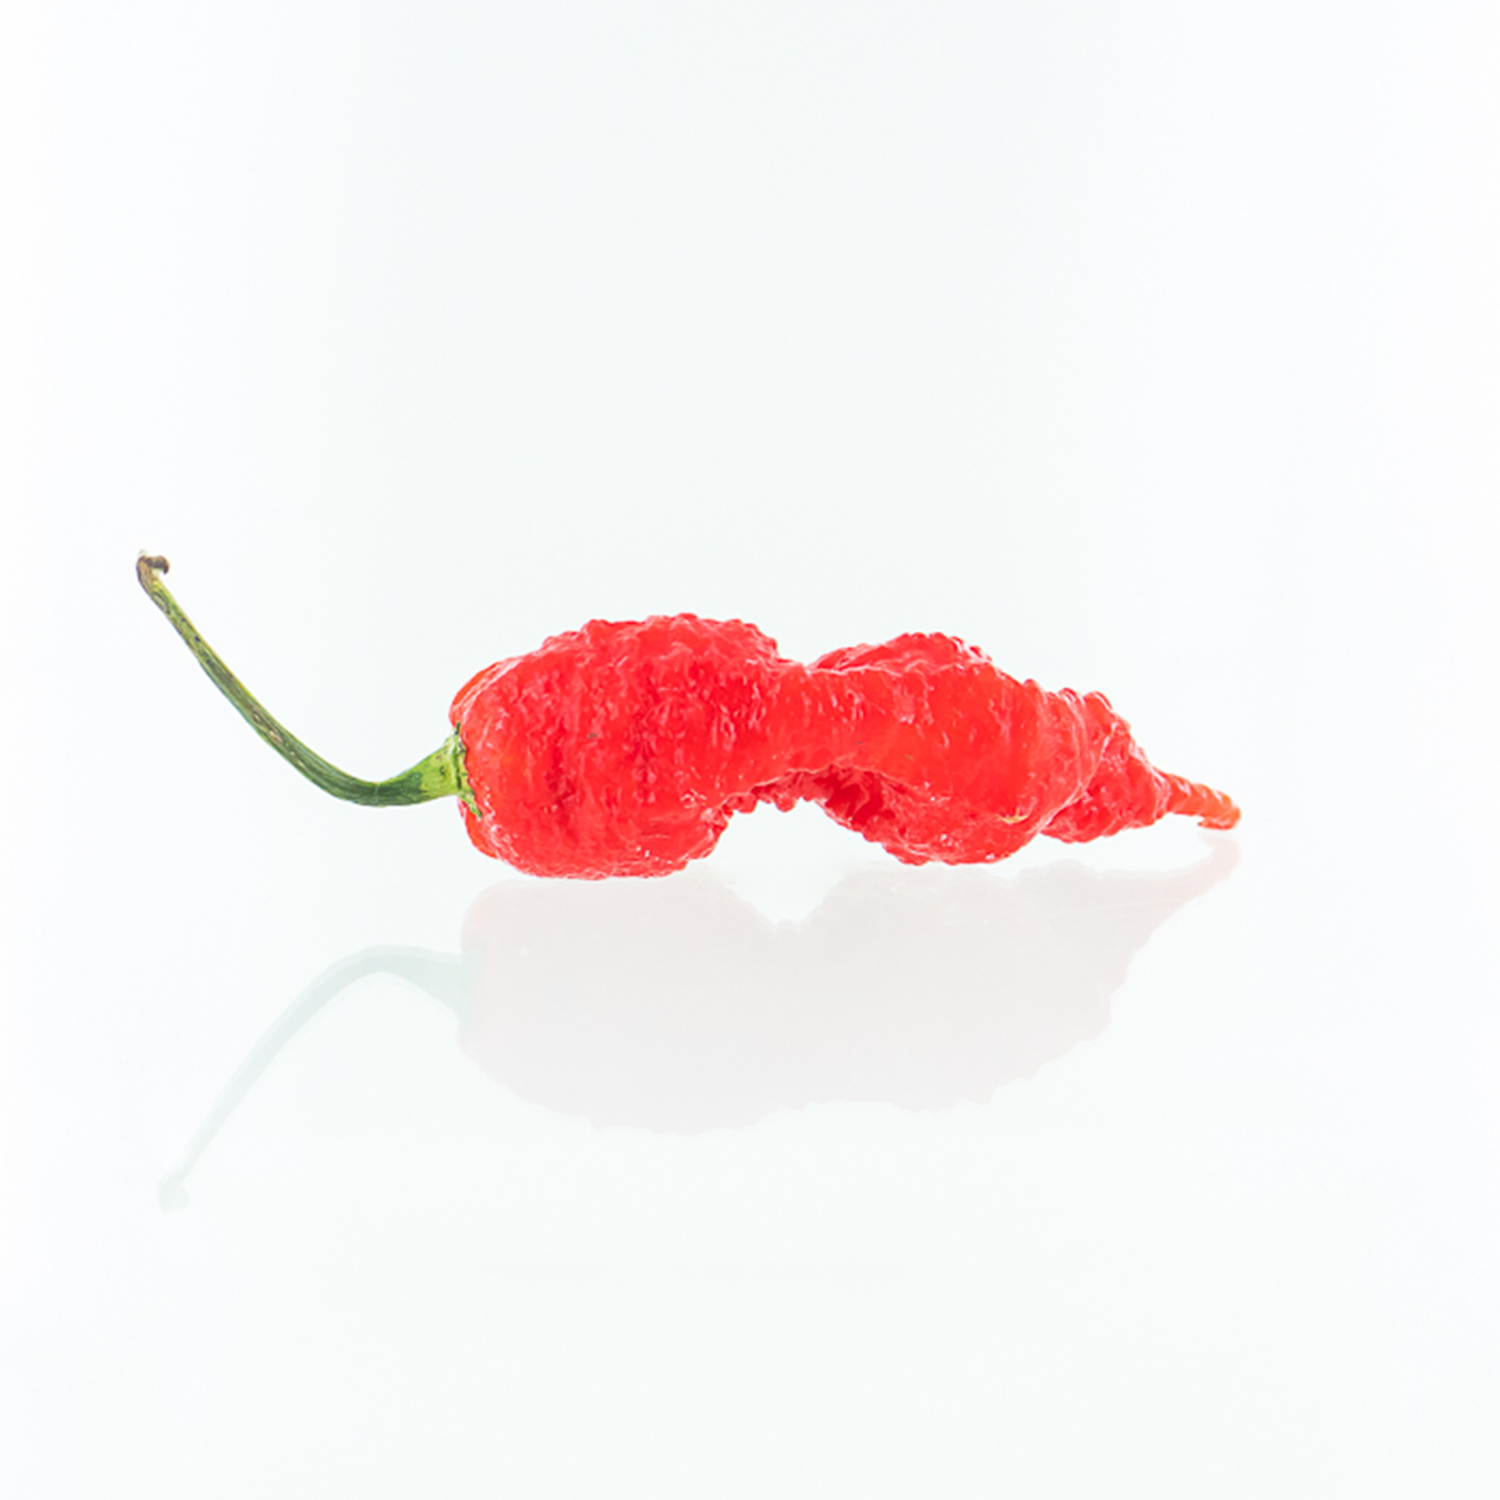 Pepper Joe's Primotalii Red pepper seeds - red bumpy pepper on white background